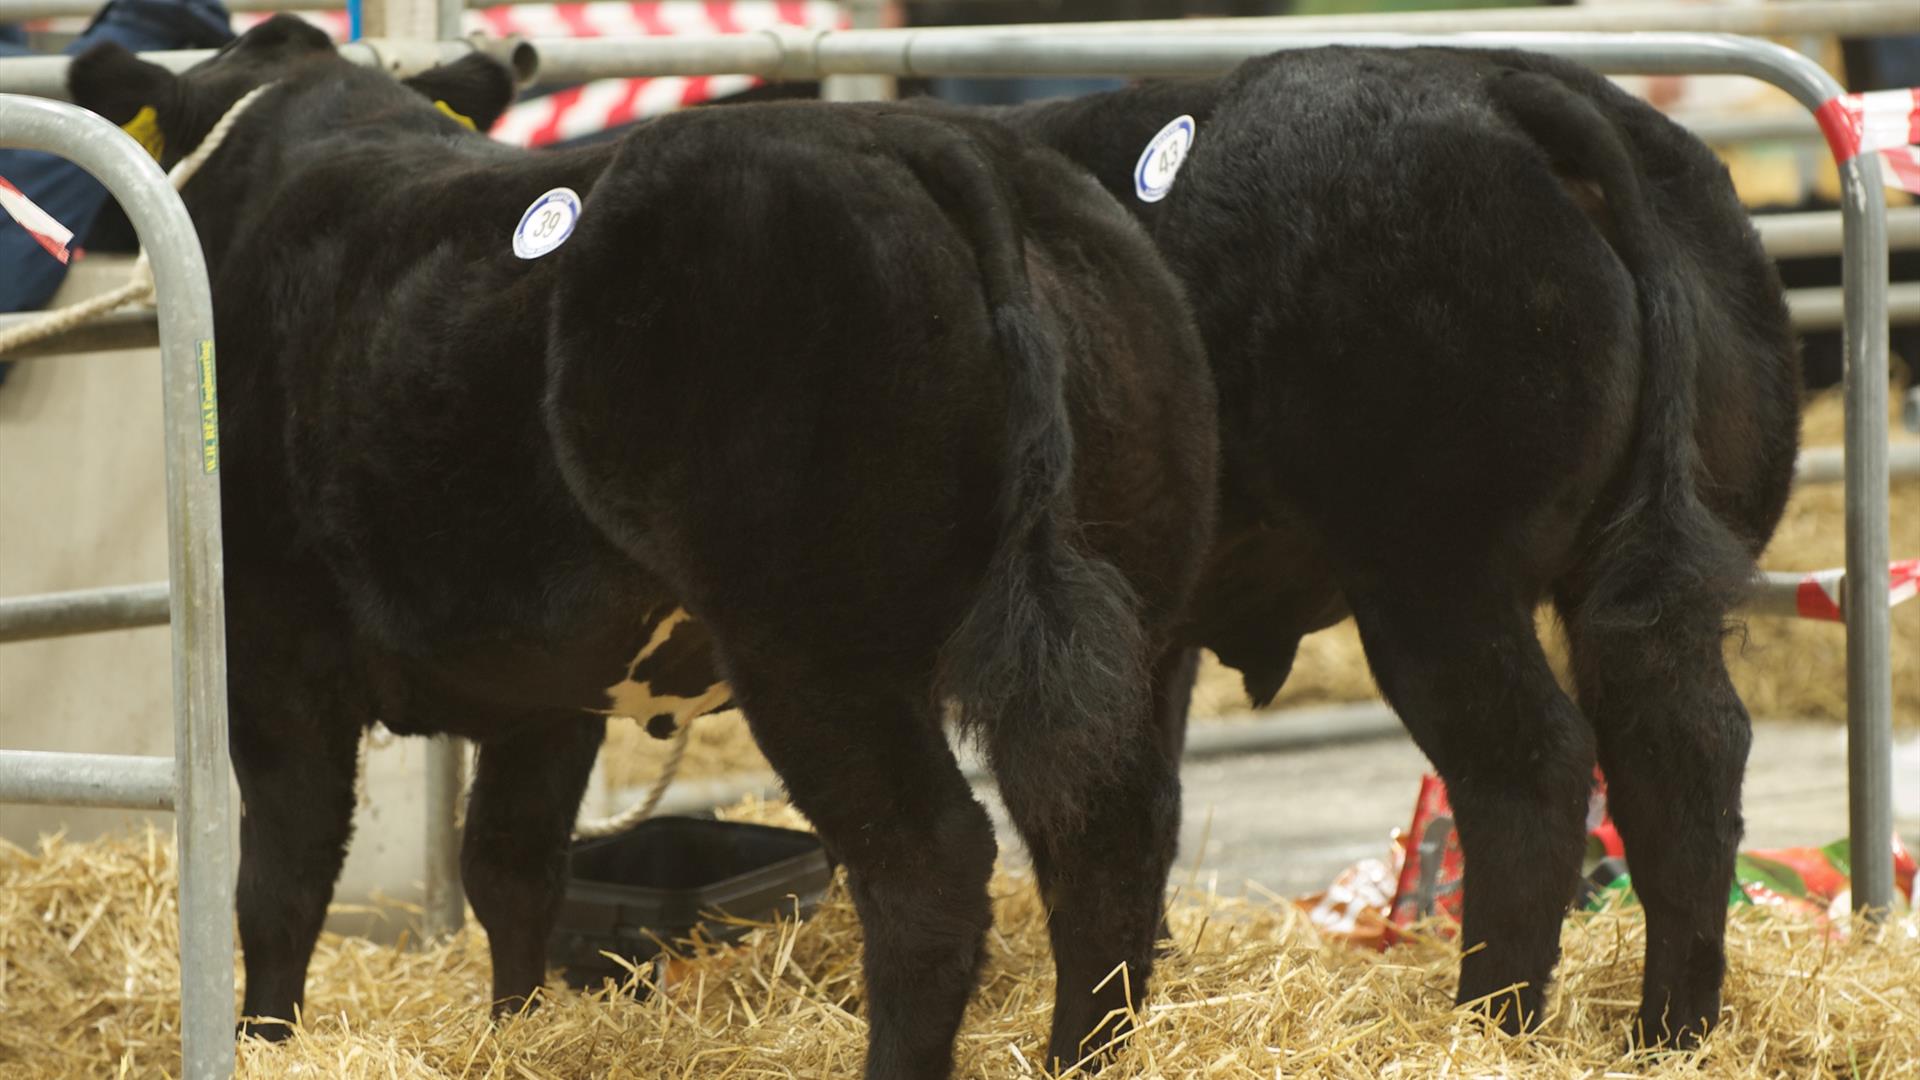 Image is of 2 cows in a pen at an agricultural show in the Eikon Exhibition Centre Lisburn